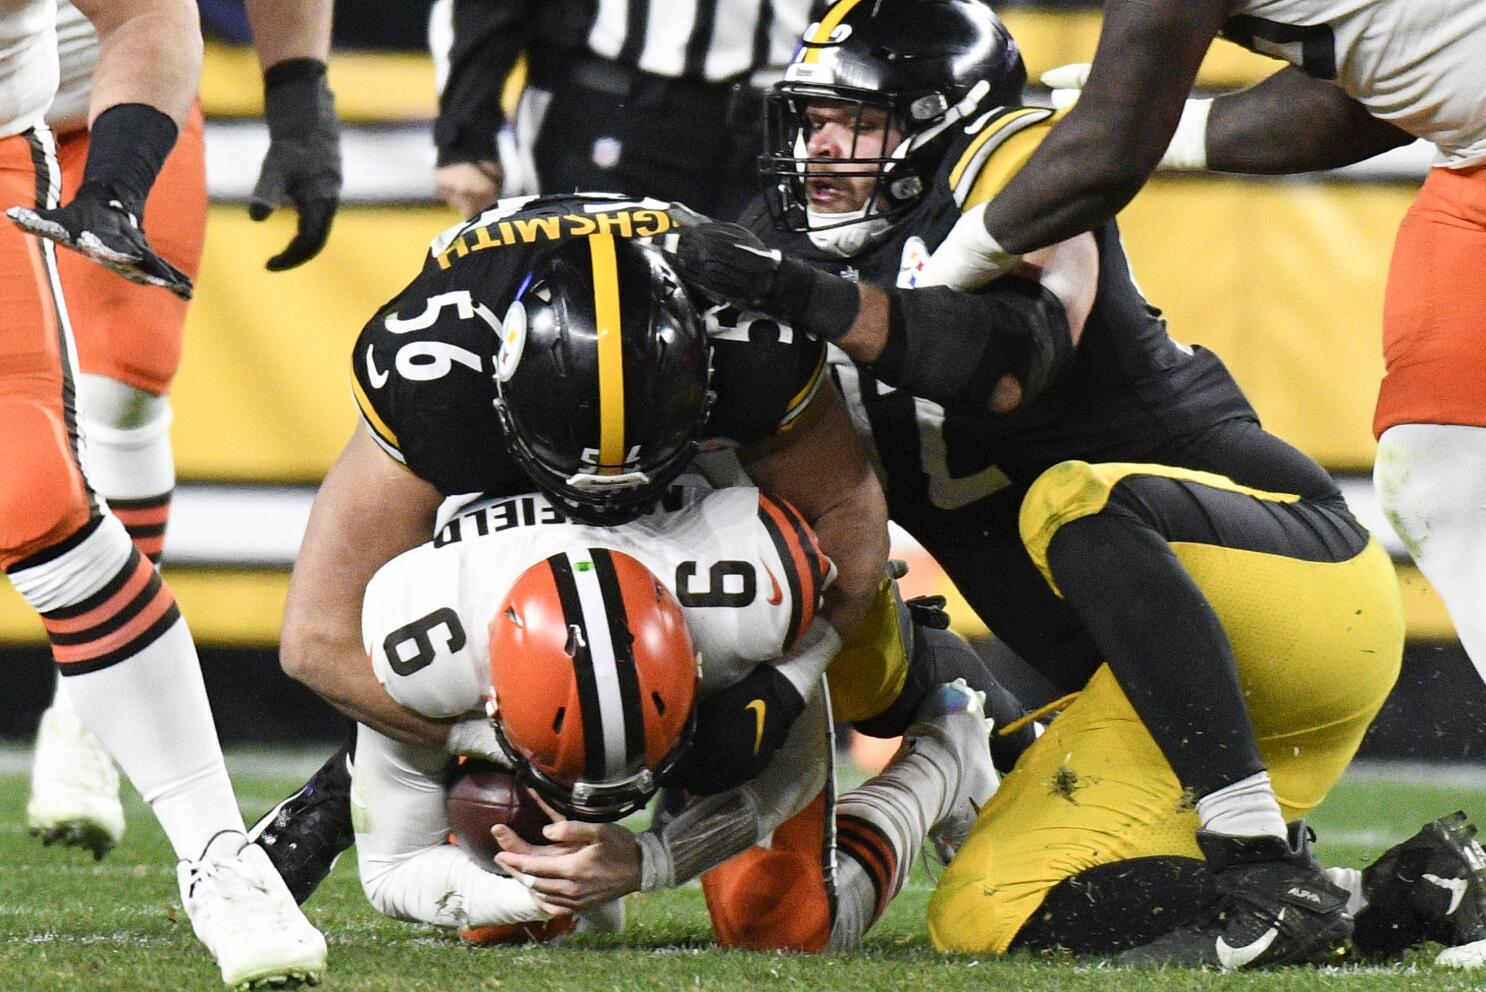 Browns lose to the Steelers on Monday Night Football